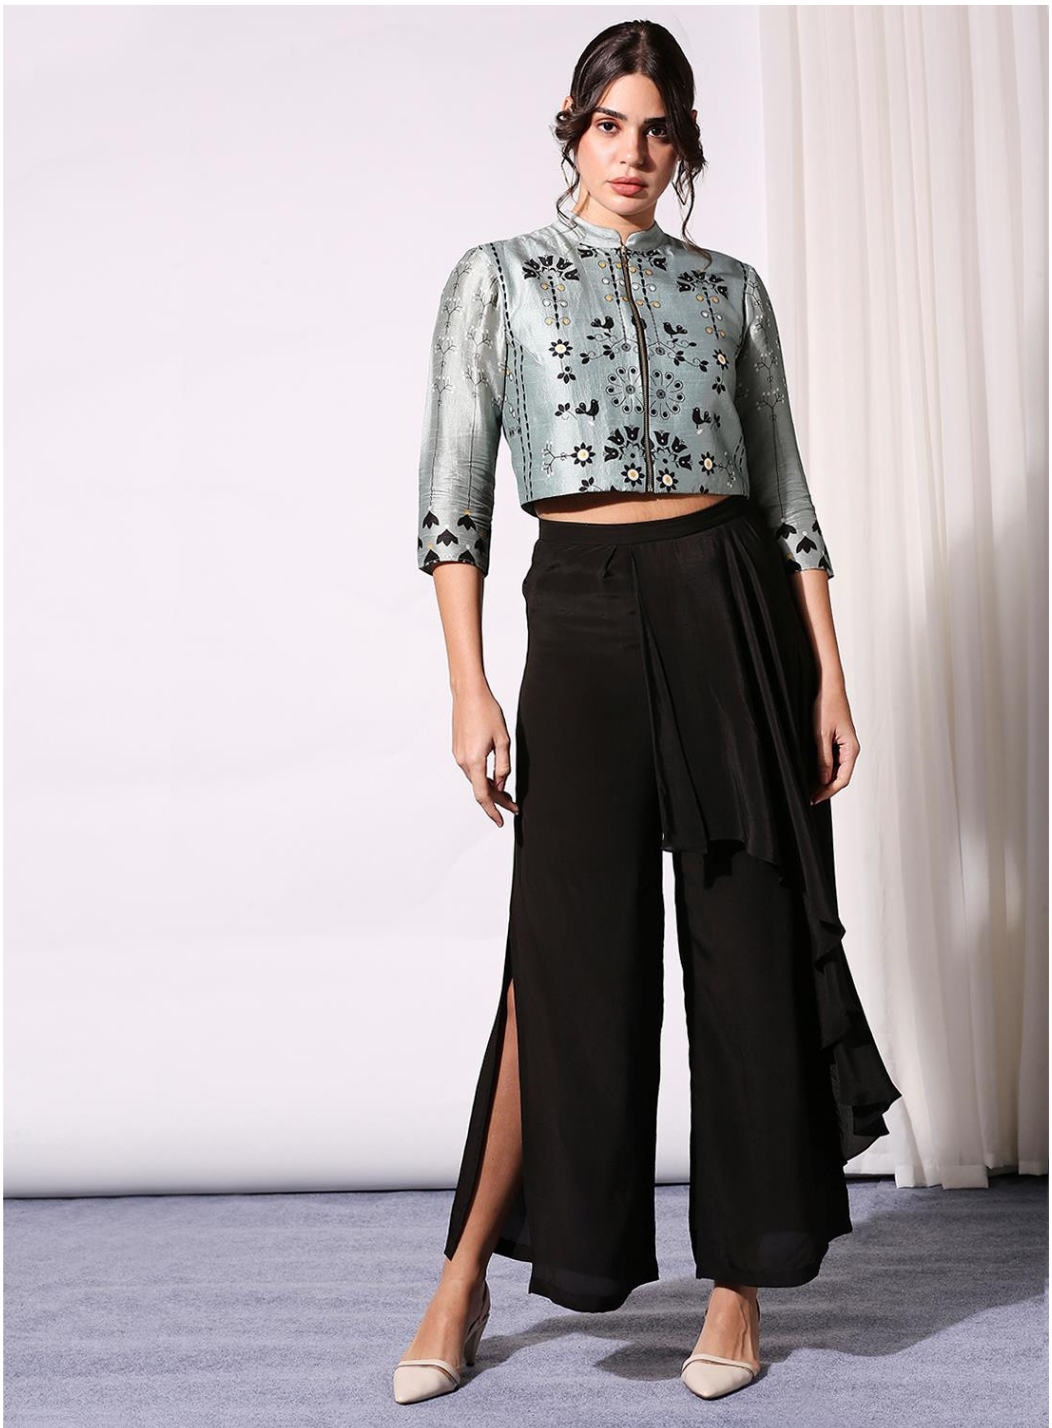 Image of This unique set is perfect for any special occasion. Crafted from a lightweight and breathable blend, the crop top features a classic round neckline and a short length for a modern silhouette. The palazzo pants add a touch of drama with a wide leg and statement waistband. Both pieces can be dressed up or down for limitless style possibilities.  From savoirfashions.com